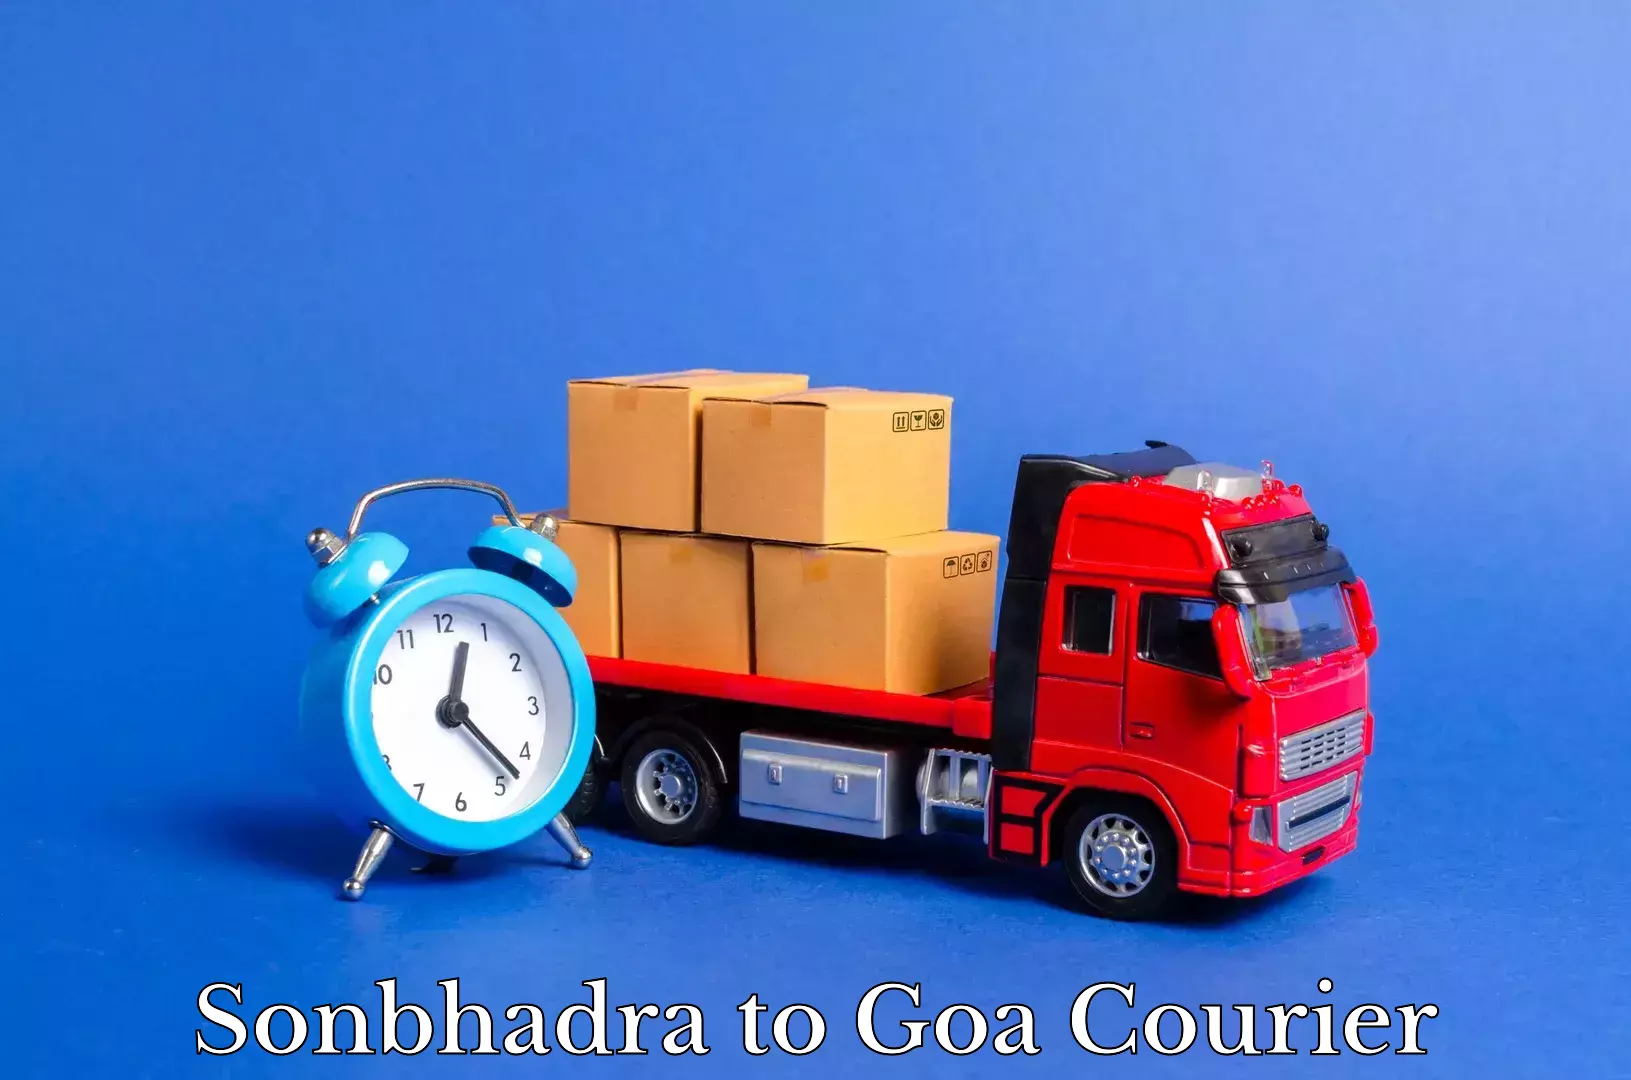 Furniture delivery service Sonbhadra to Goa